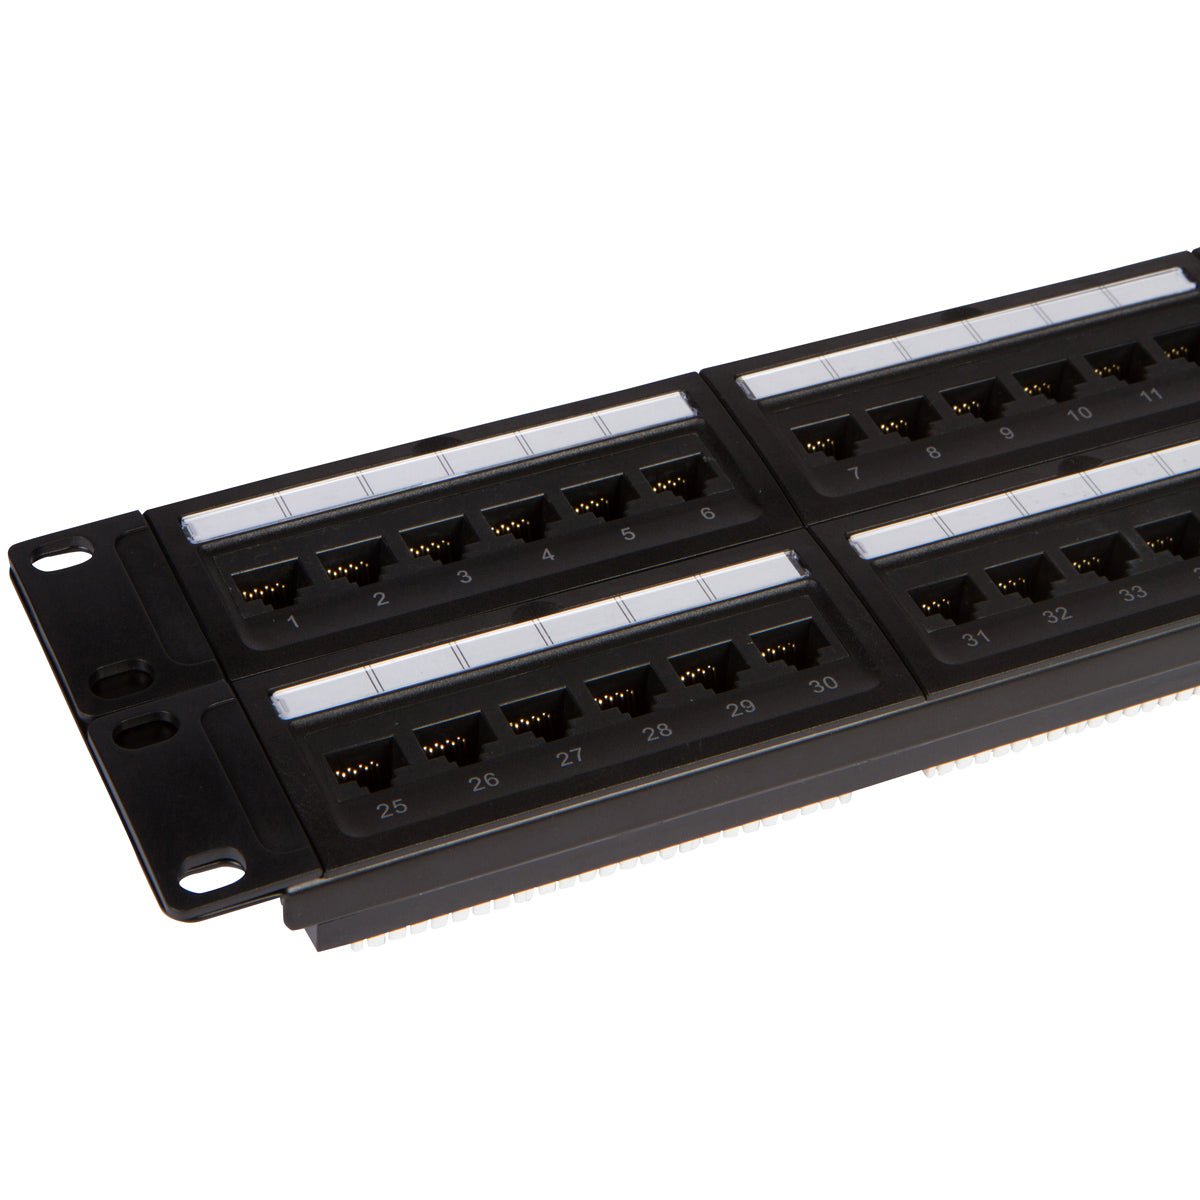 48 Port Cat6 Patch Panel with Punch Down Tool and Cable Management System (1, 48 Port) - Milena International Inc